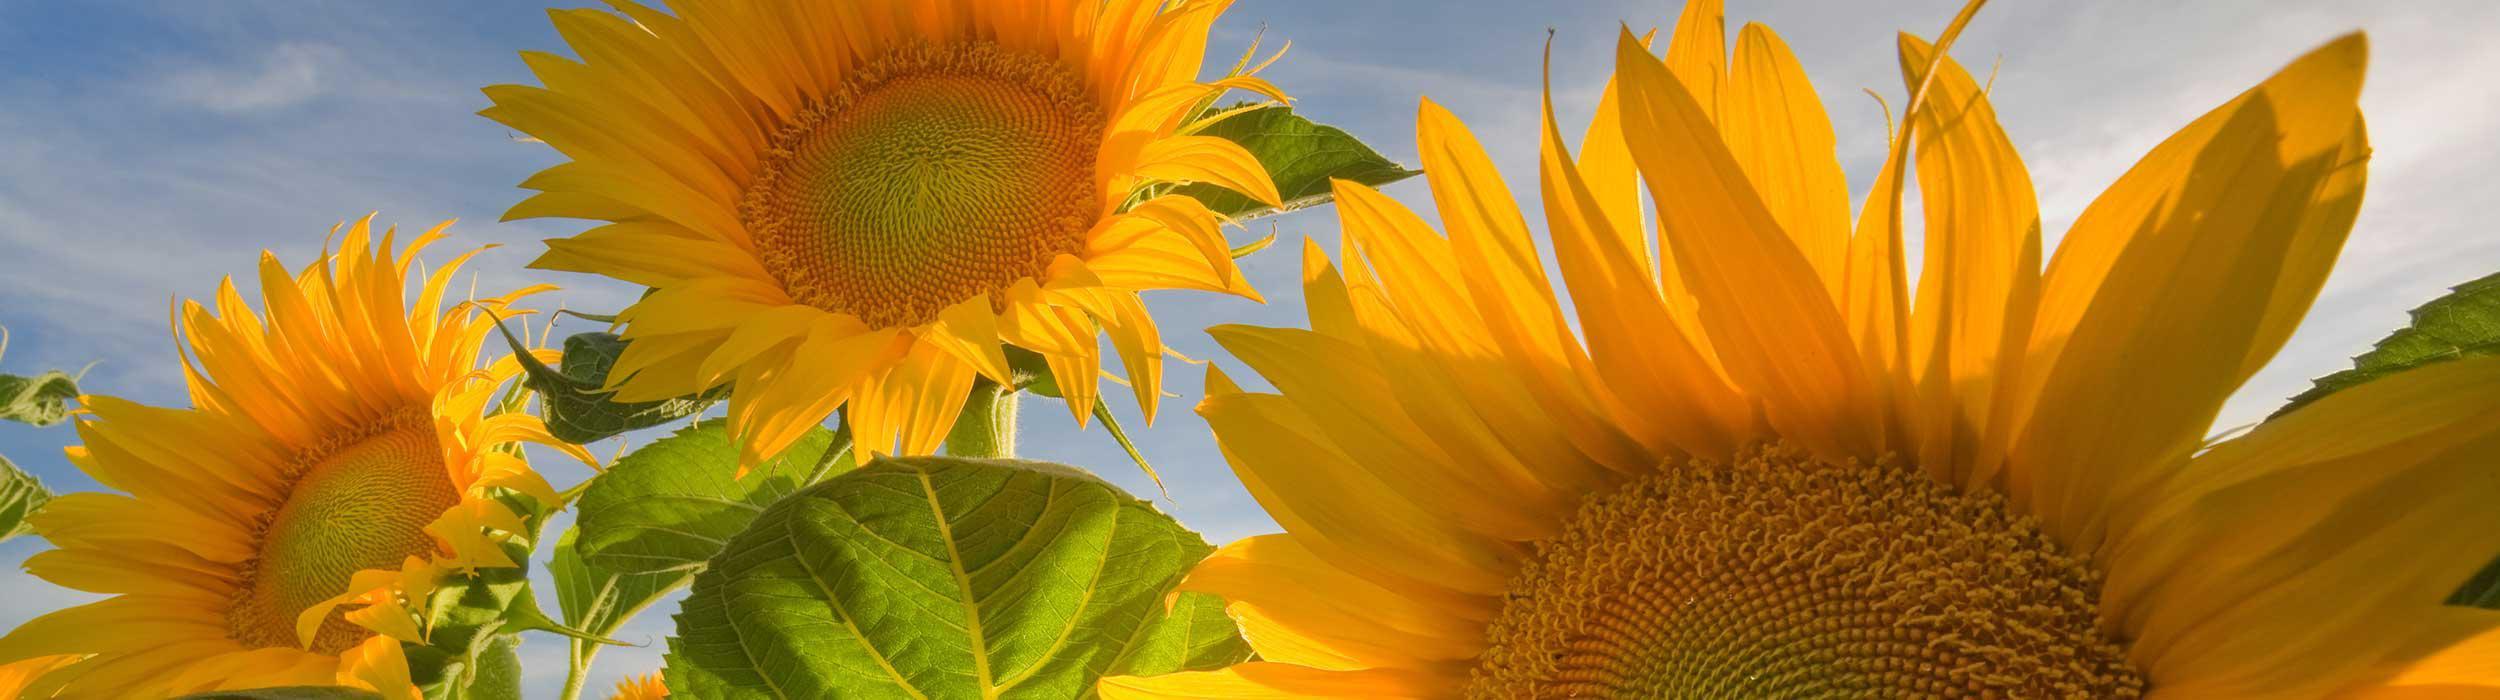 Bright and cheery sunflowers, close up.